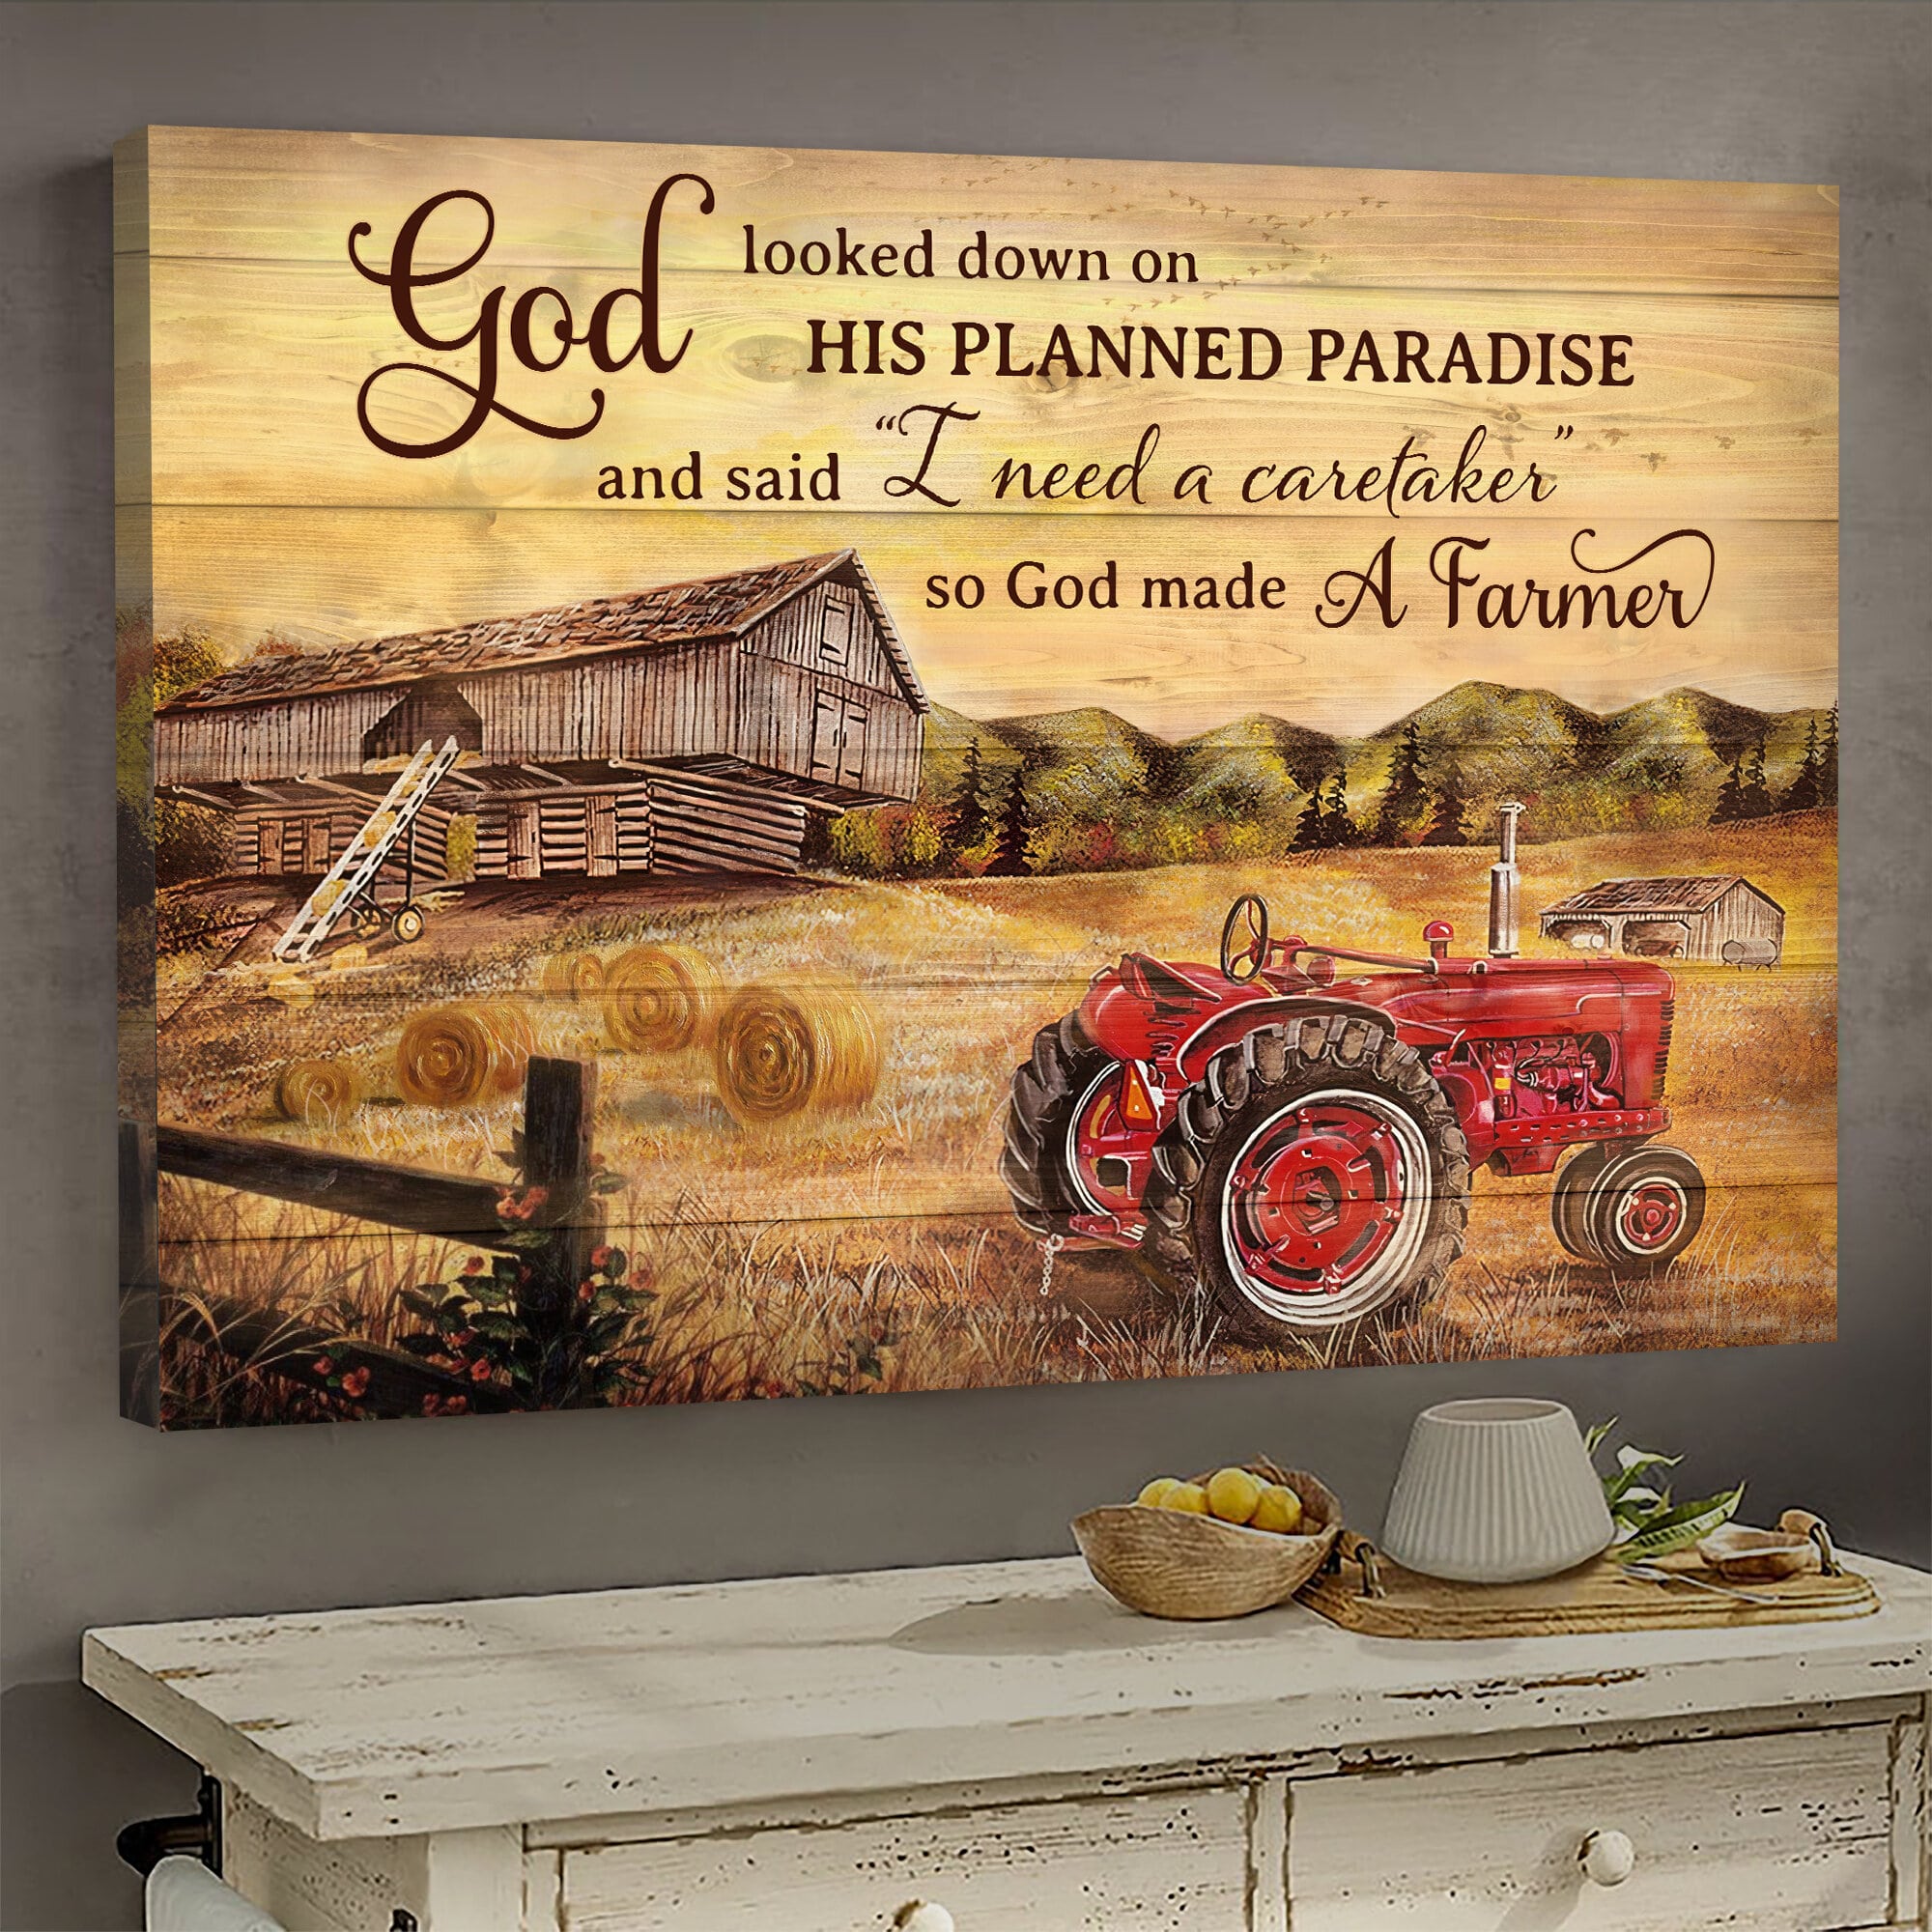 Paddy Field, Electric Tricycle, Old Barn Painting, So God made a farmer - Jesus Landscape Canvas Prints, Wall Art